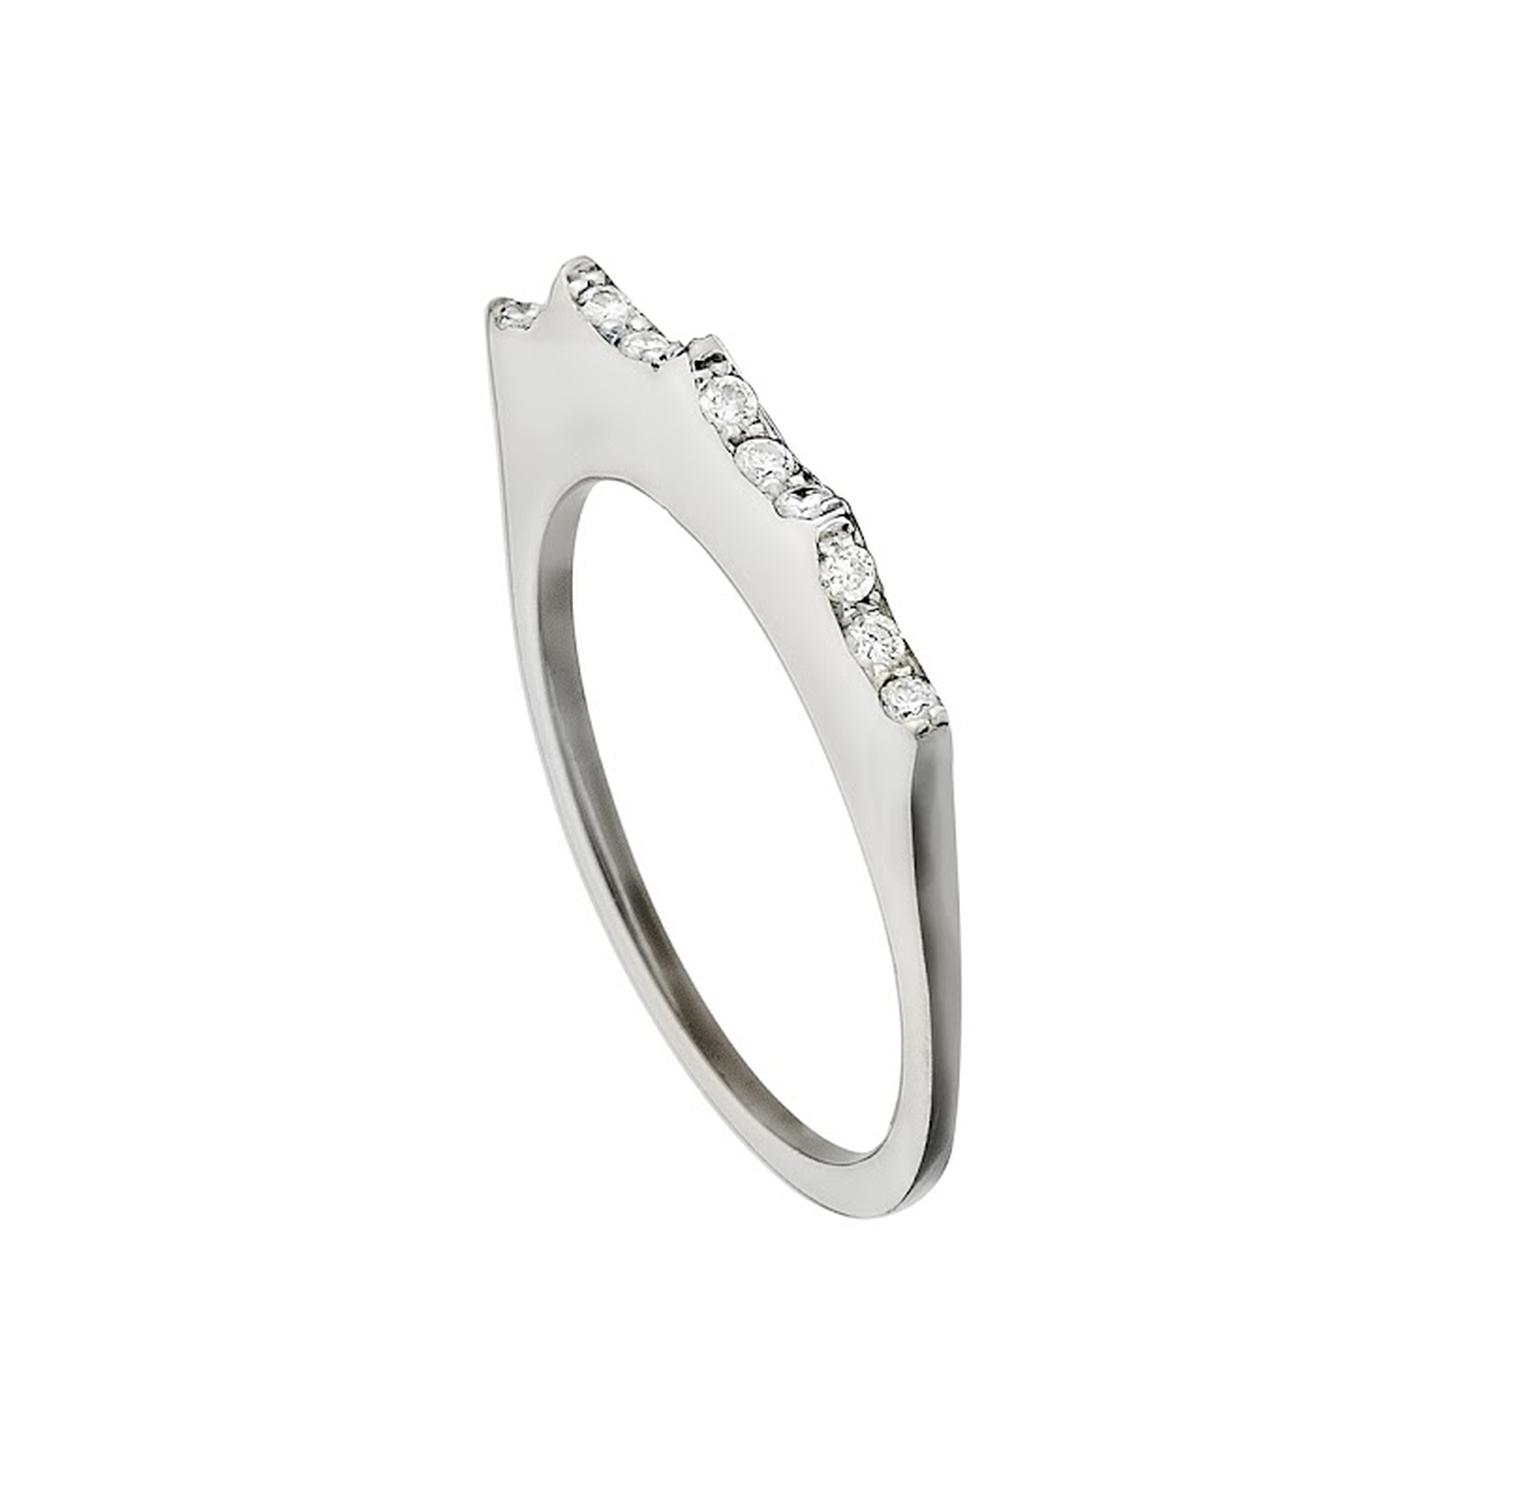 Mimata diamond ring in white gold, from the Empress collection.